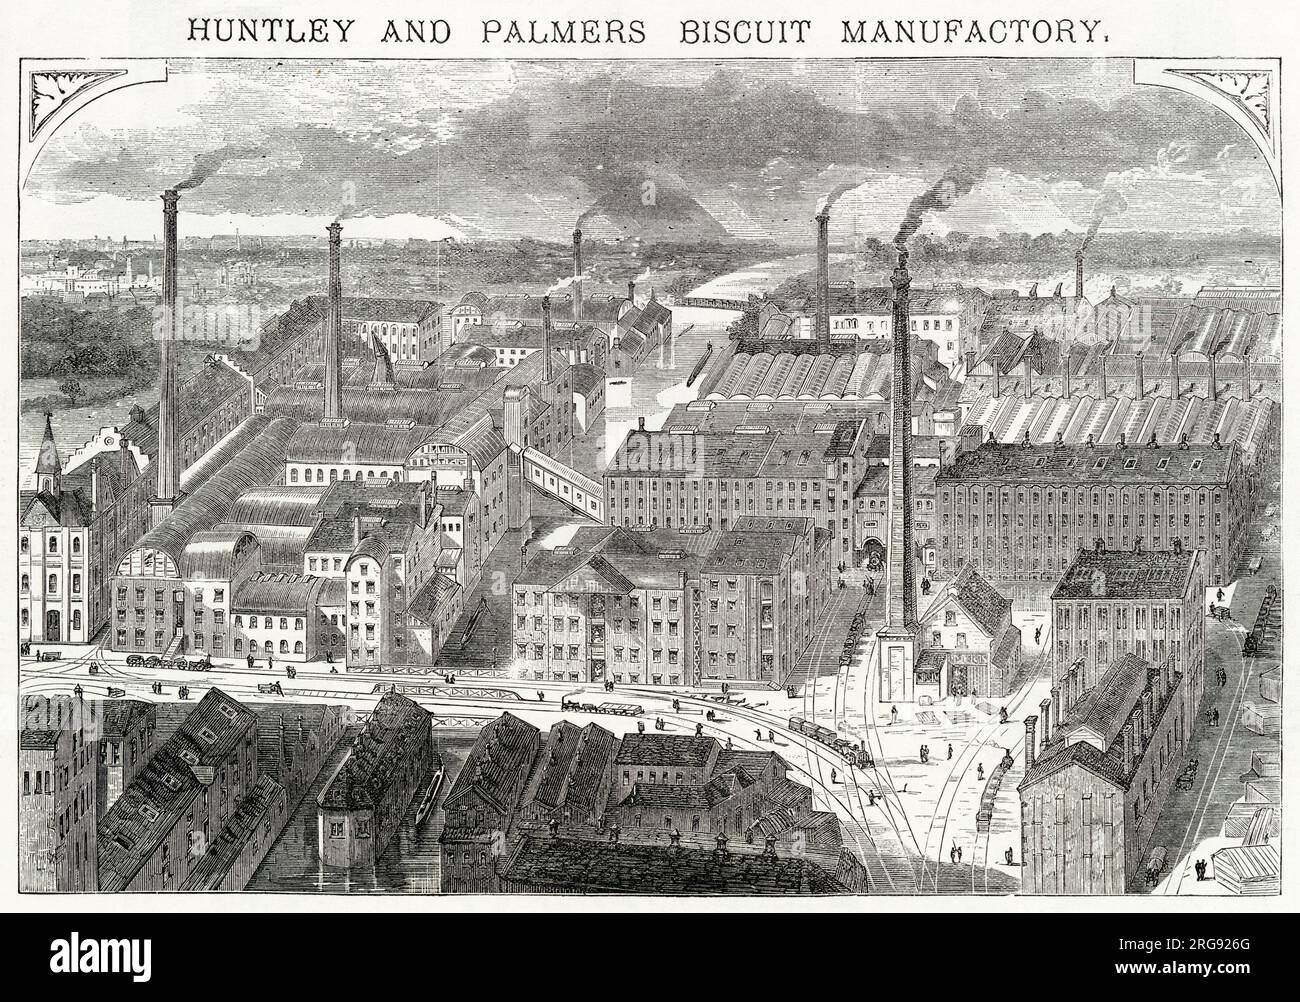 Exterior in Huntley and Palmers biscuit manufactory in Reading, Berkshire. Stock Photo